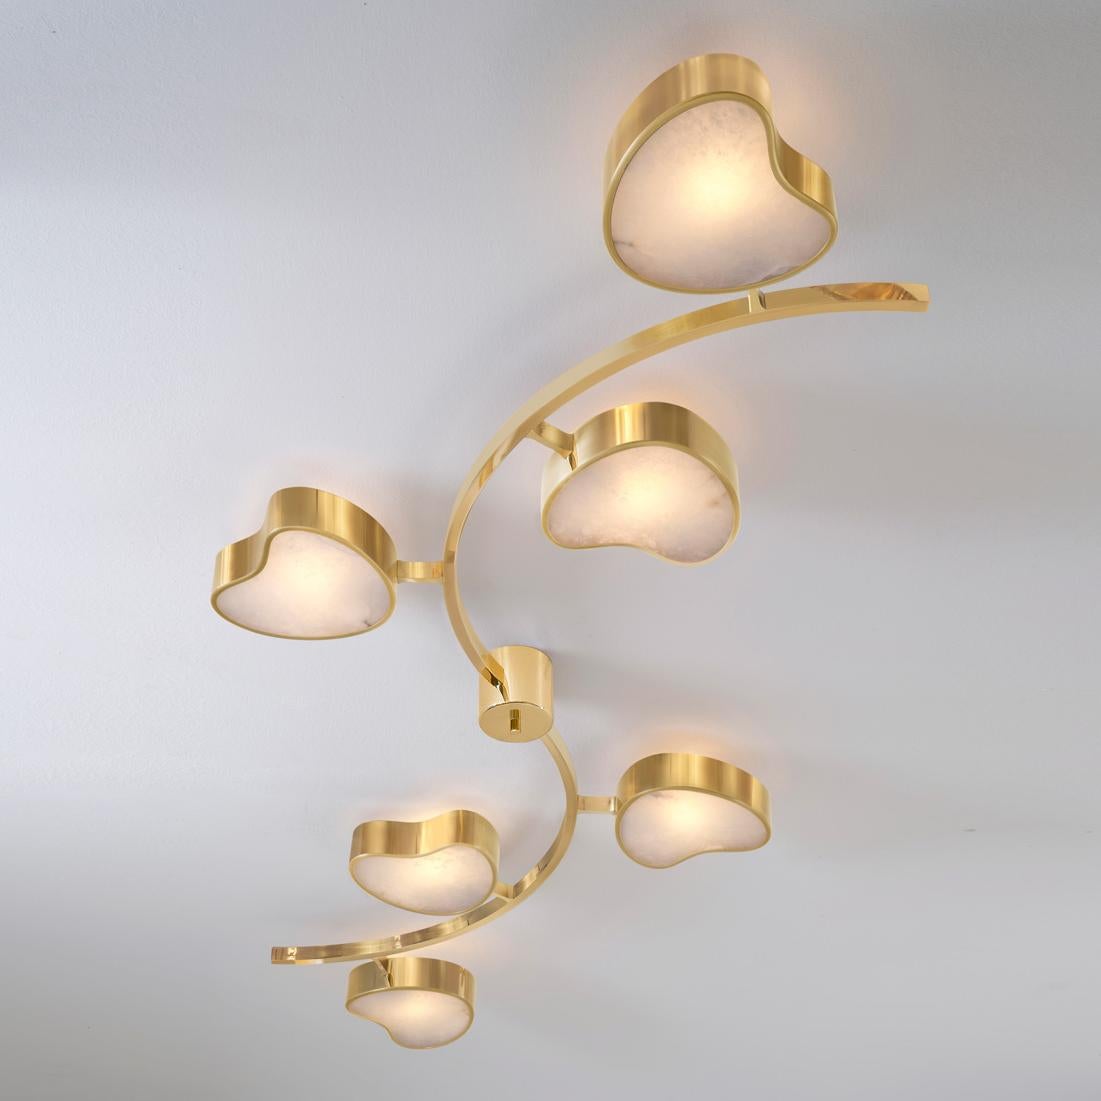 The Cuore collection was conceived with the goal of creating fixtures that are unexpected yet clean and harmoniously balanced. This is highlighted by the organically styled shades sprouting out of linear frames. Carefully thought-out details such as